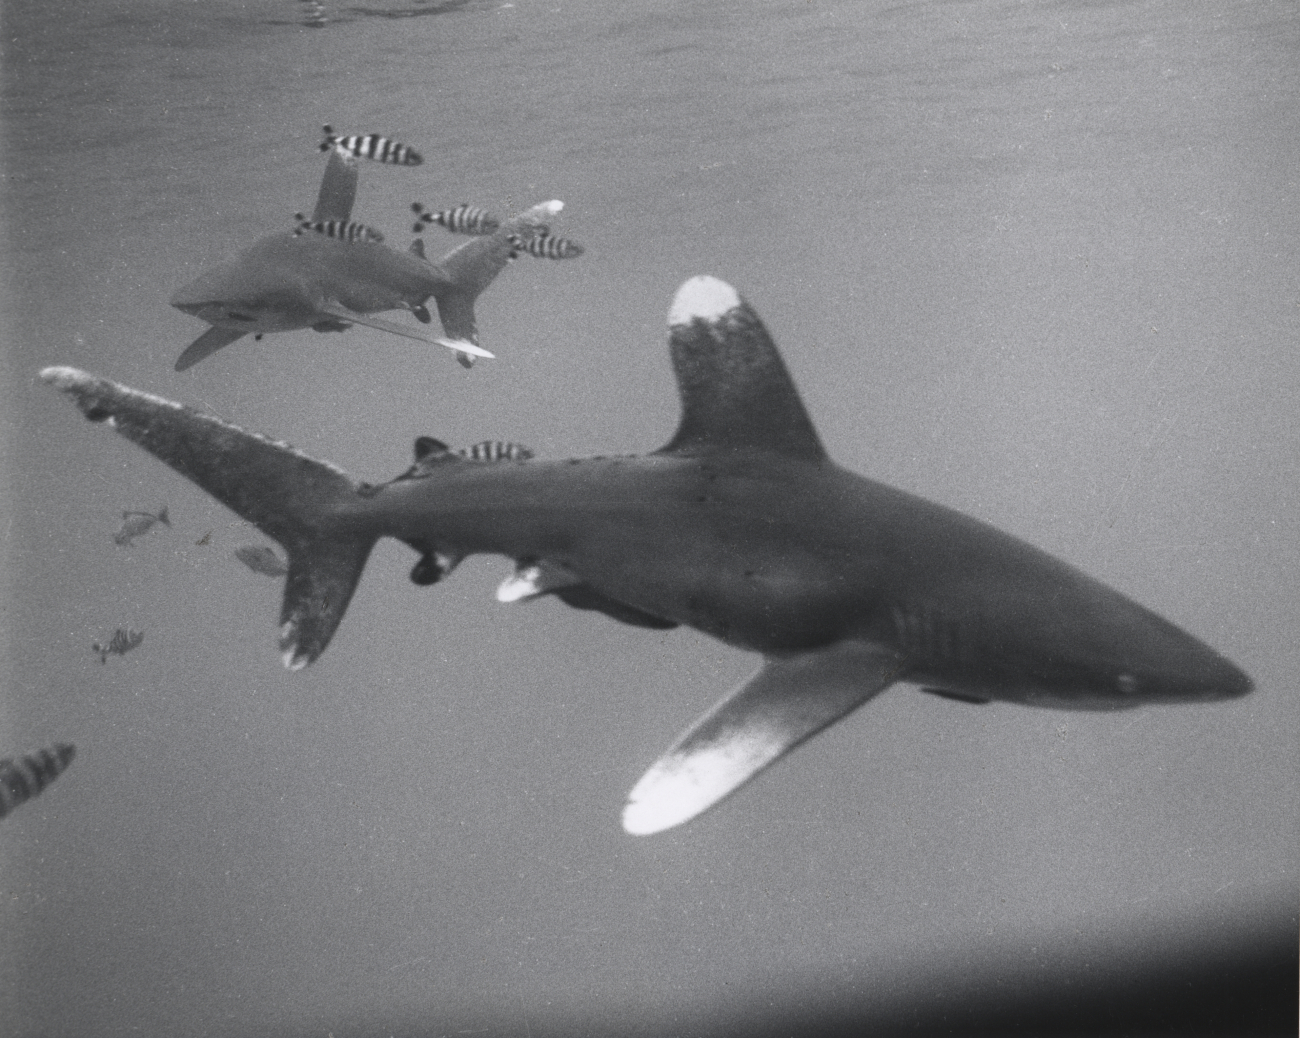 Whitetip sharks (Carcharhinus longimanus) and pilotfish photographed from theraft NENUE in the Central Pacific Ocean